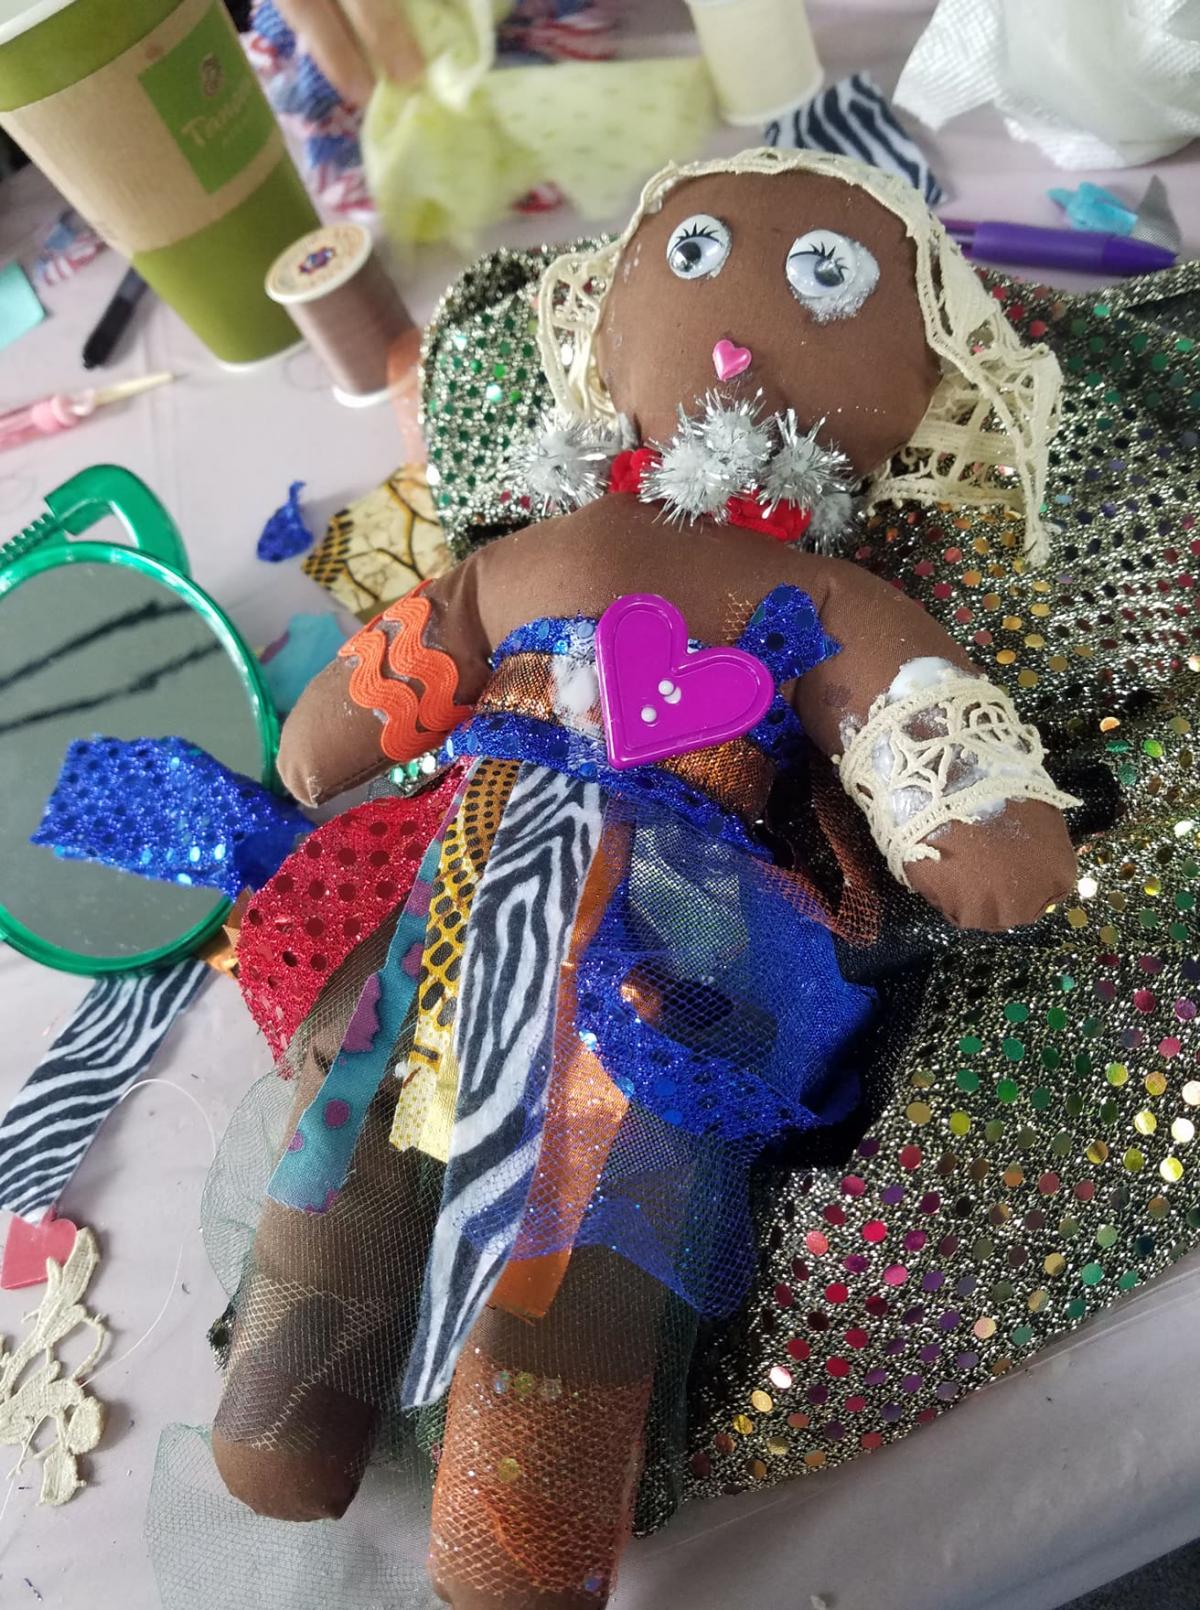 Photo of a hand-made Black baby doll with colorful embellishments